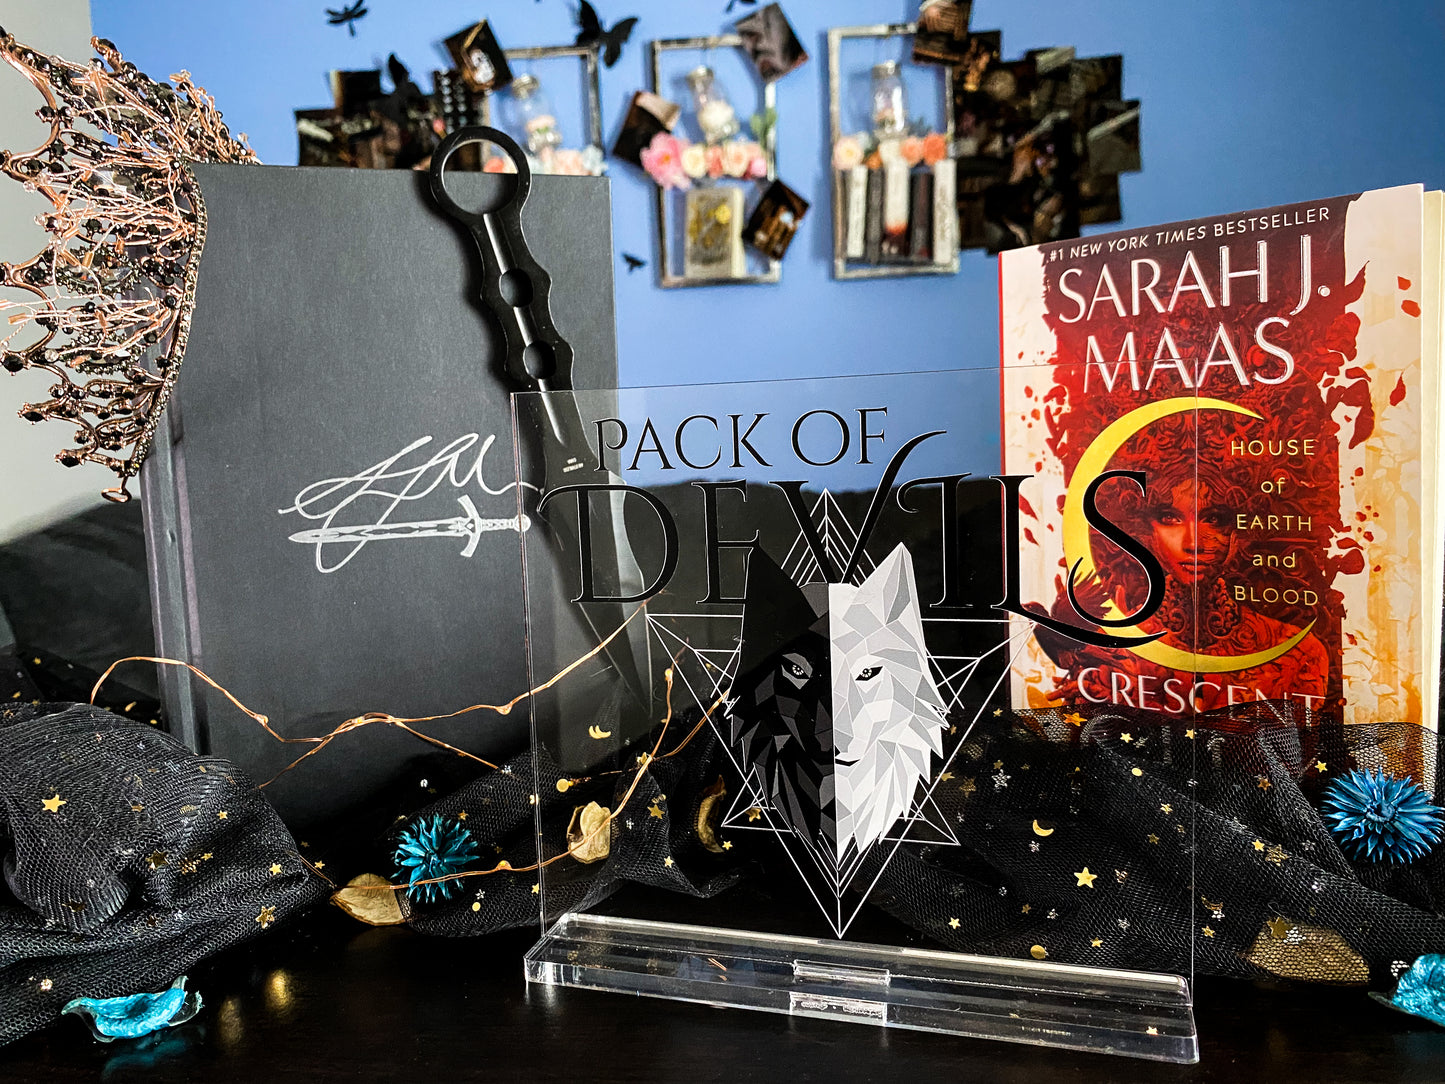 Pack of Devils - Crescent City Series - Freestanding Bookshelf / Desktop Acrylic Accessory - Officially licensed by Sarah J. Maas - D42